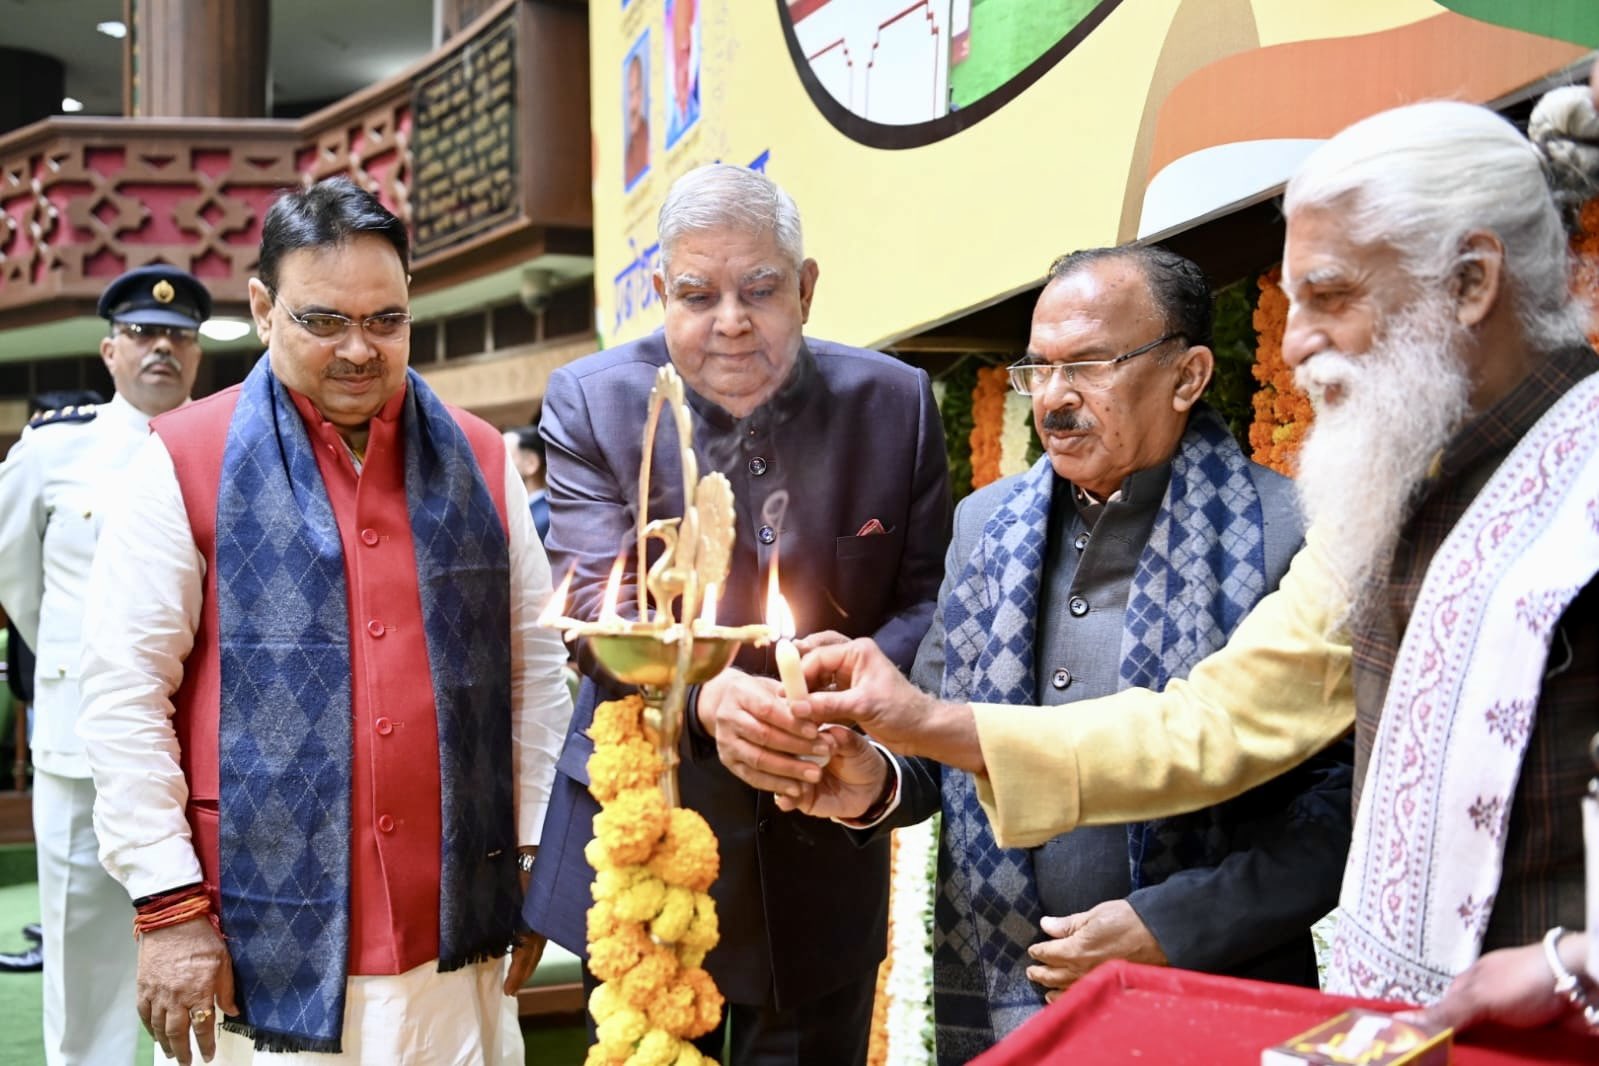 The Vice-President, Shri Jagdeep Dhankhar inaugurating the orientation programme for the new members of the 16th Rajasthan Legislative Assembly in Jaipur, Rajasthan on January 16, 2024.